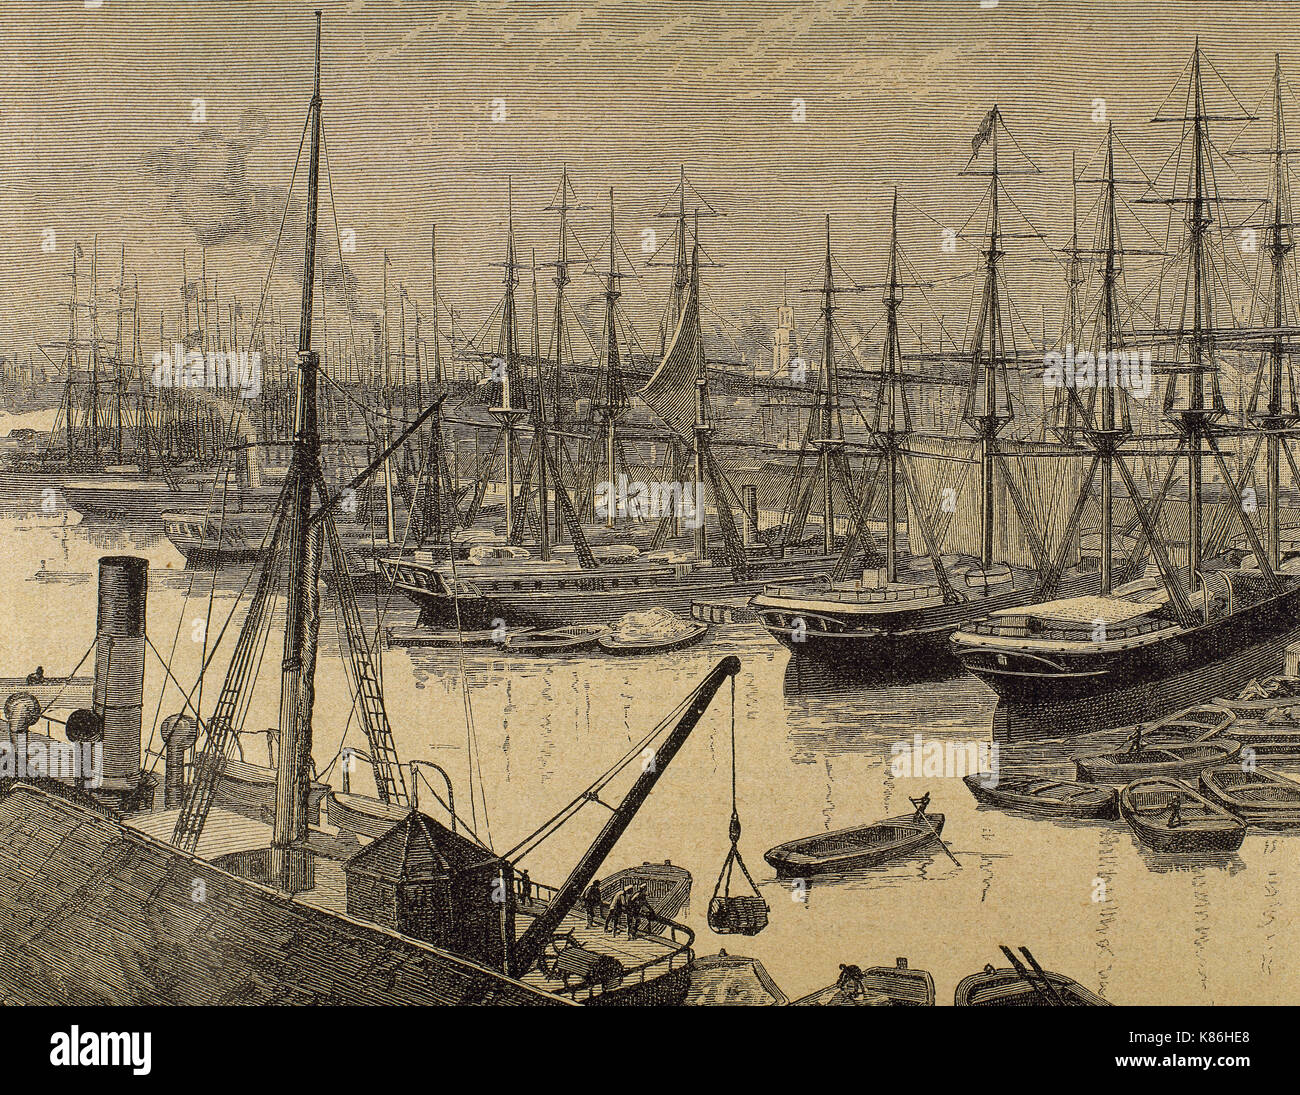 England. London. Dock of The East India Company (EIC). English and later British joint-stock company. Engraving by J.R. Wells. 'La Ilustracion Iberica', 1888. Stock Photo